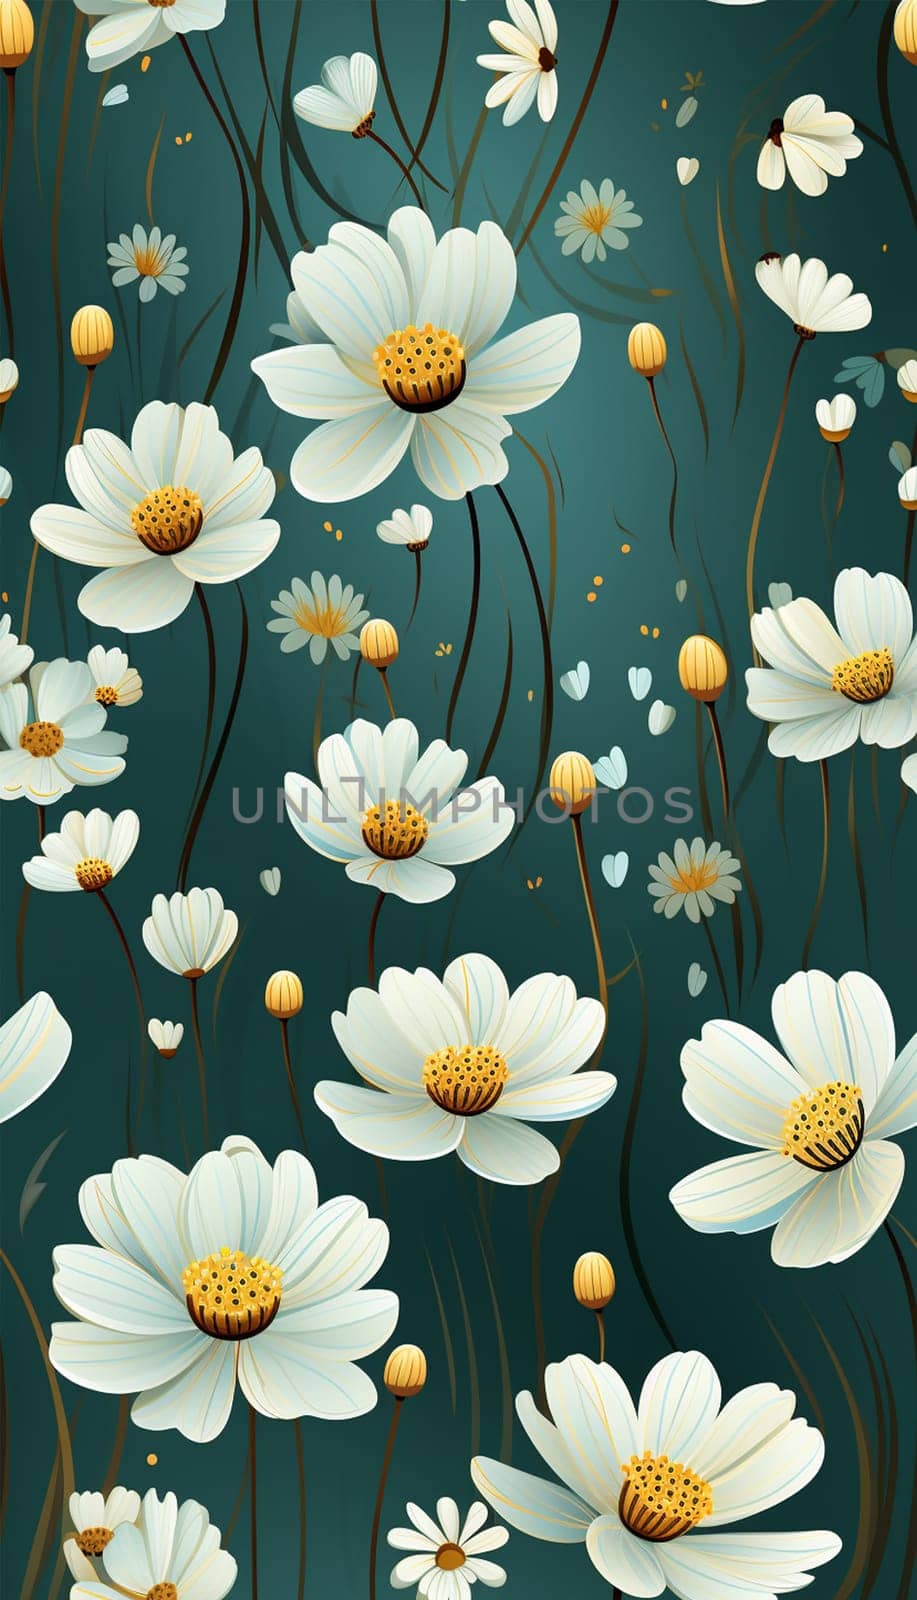 Daisy background. Trendy Hand drawn Wild Meadow florals , Flower bouquet illustration Seamless Pattern Design, Design for fashion , fabric, textile, wallpaper, cover, web , wrapping and all prints Cute